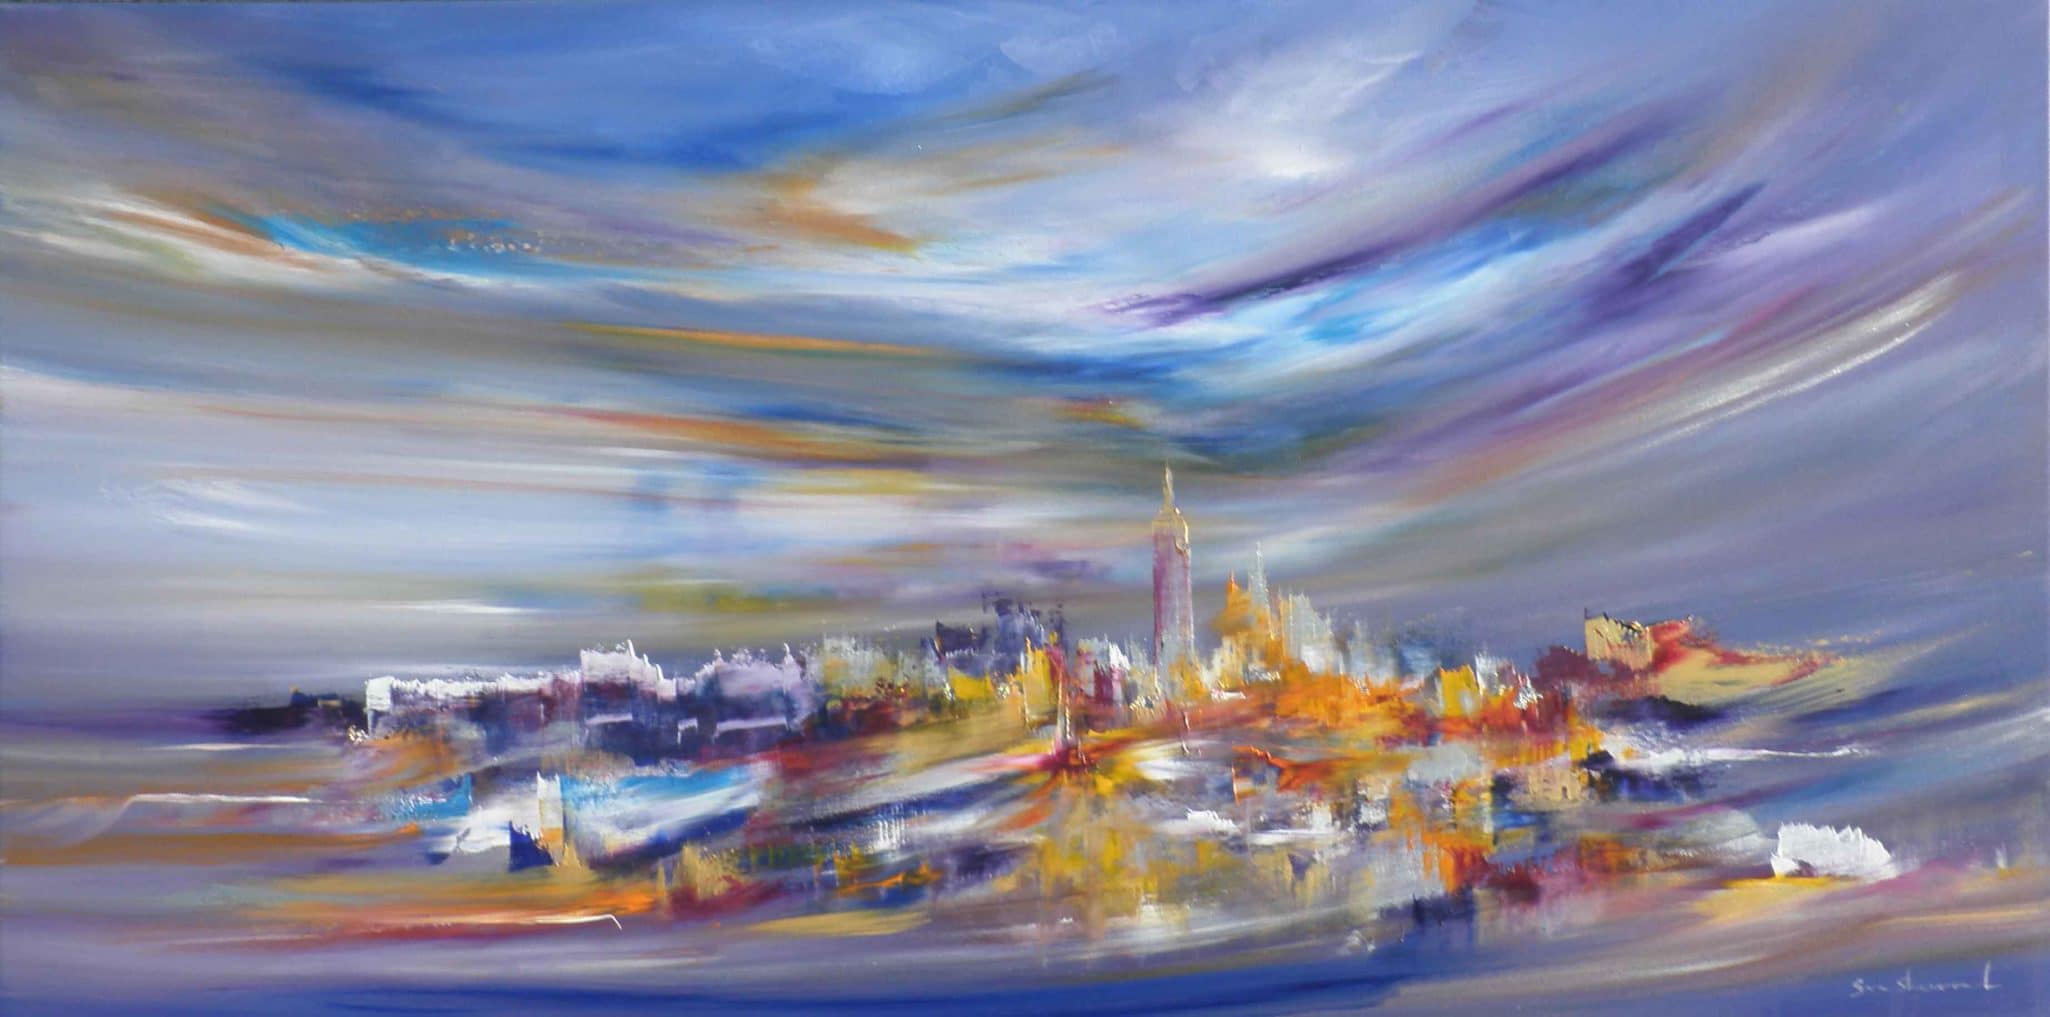 "Touched by Rainbows", New York Cityscape by Sara Sherwood, oil on canvas